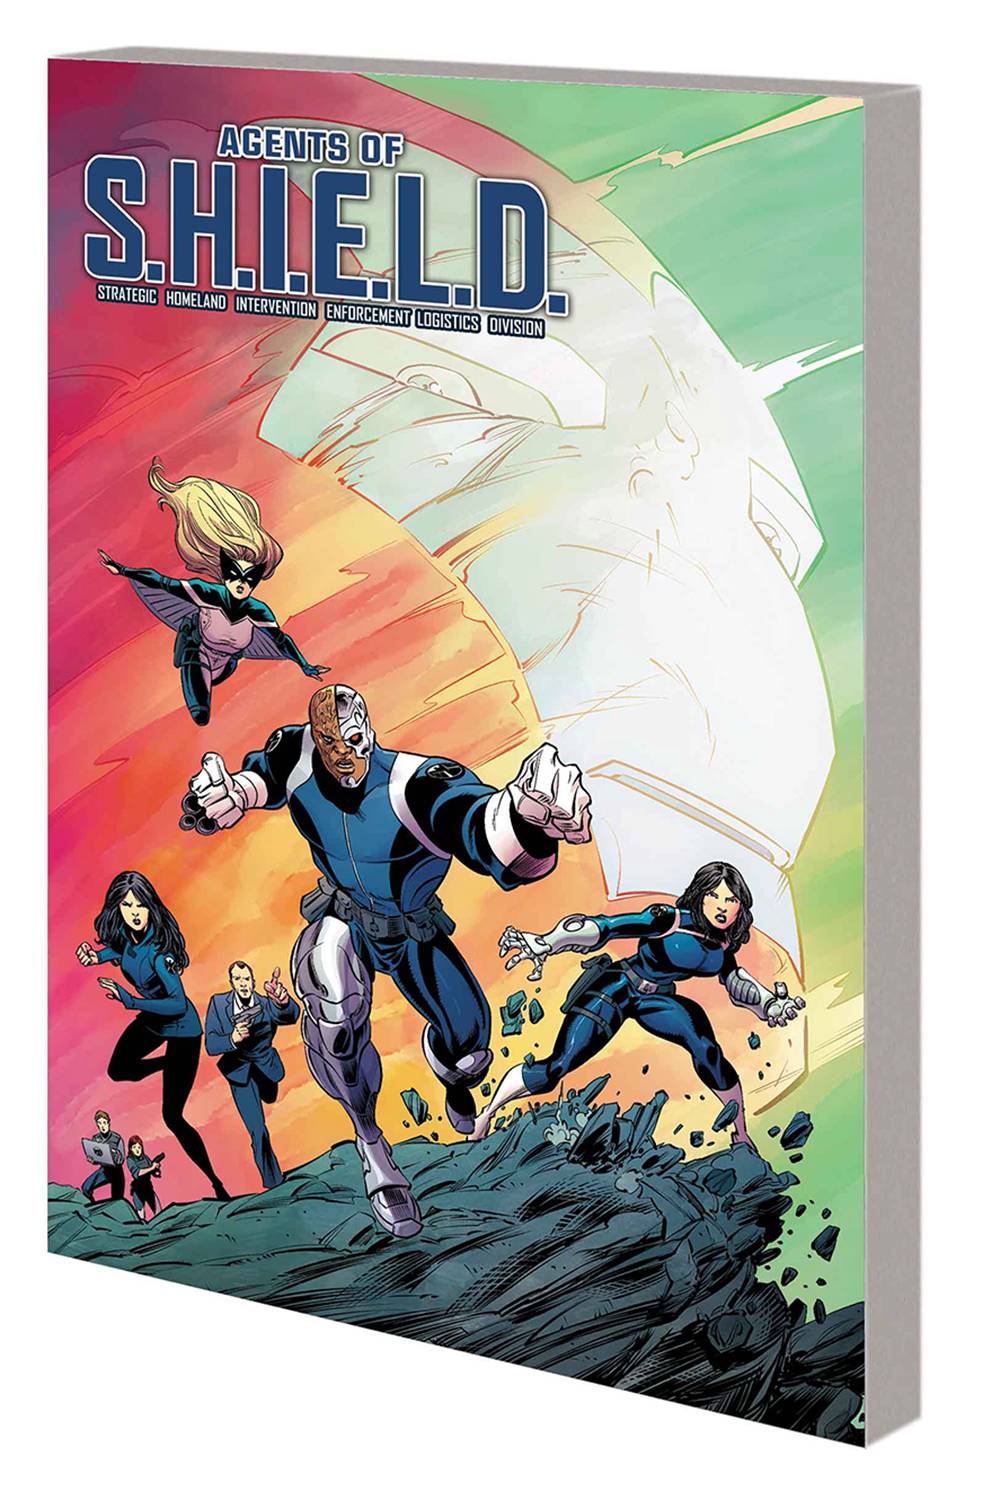 APR161086 - AGENTS OF SHIELD TP VOL 01 COULSON PROTOCOLS - Previews World